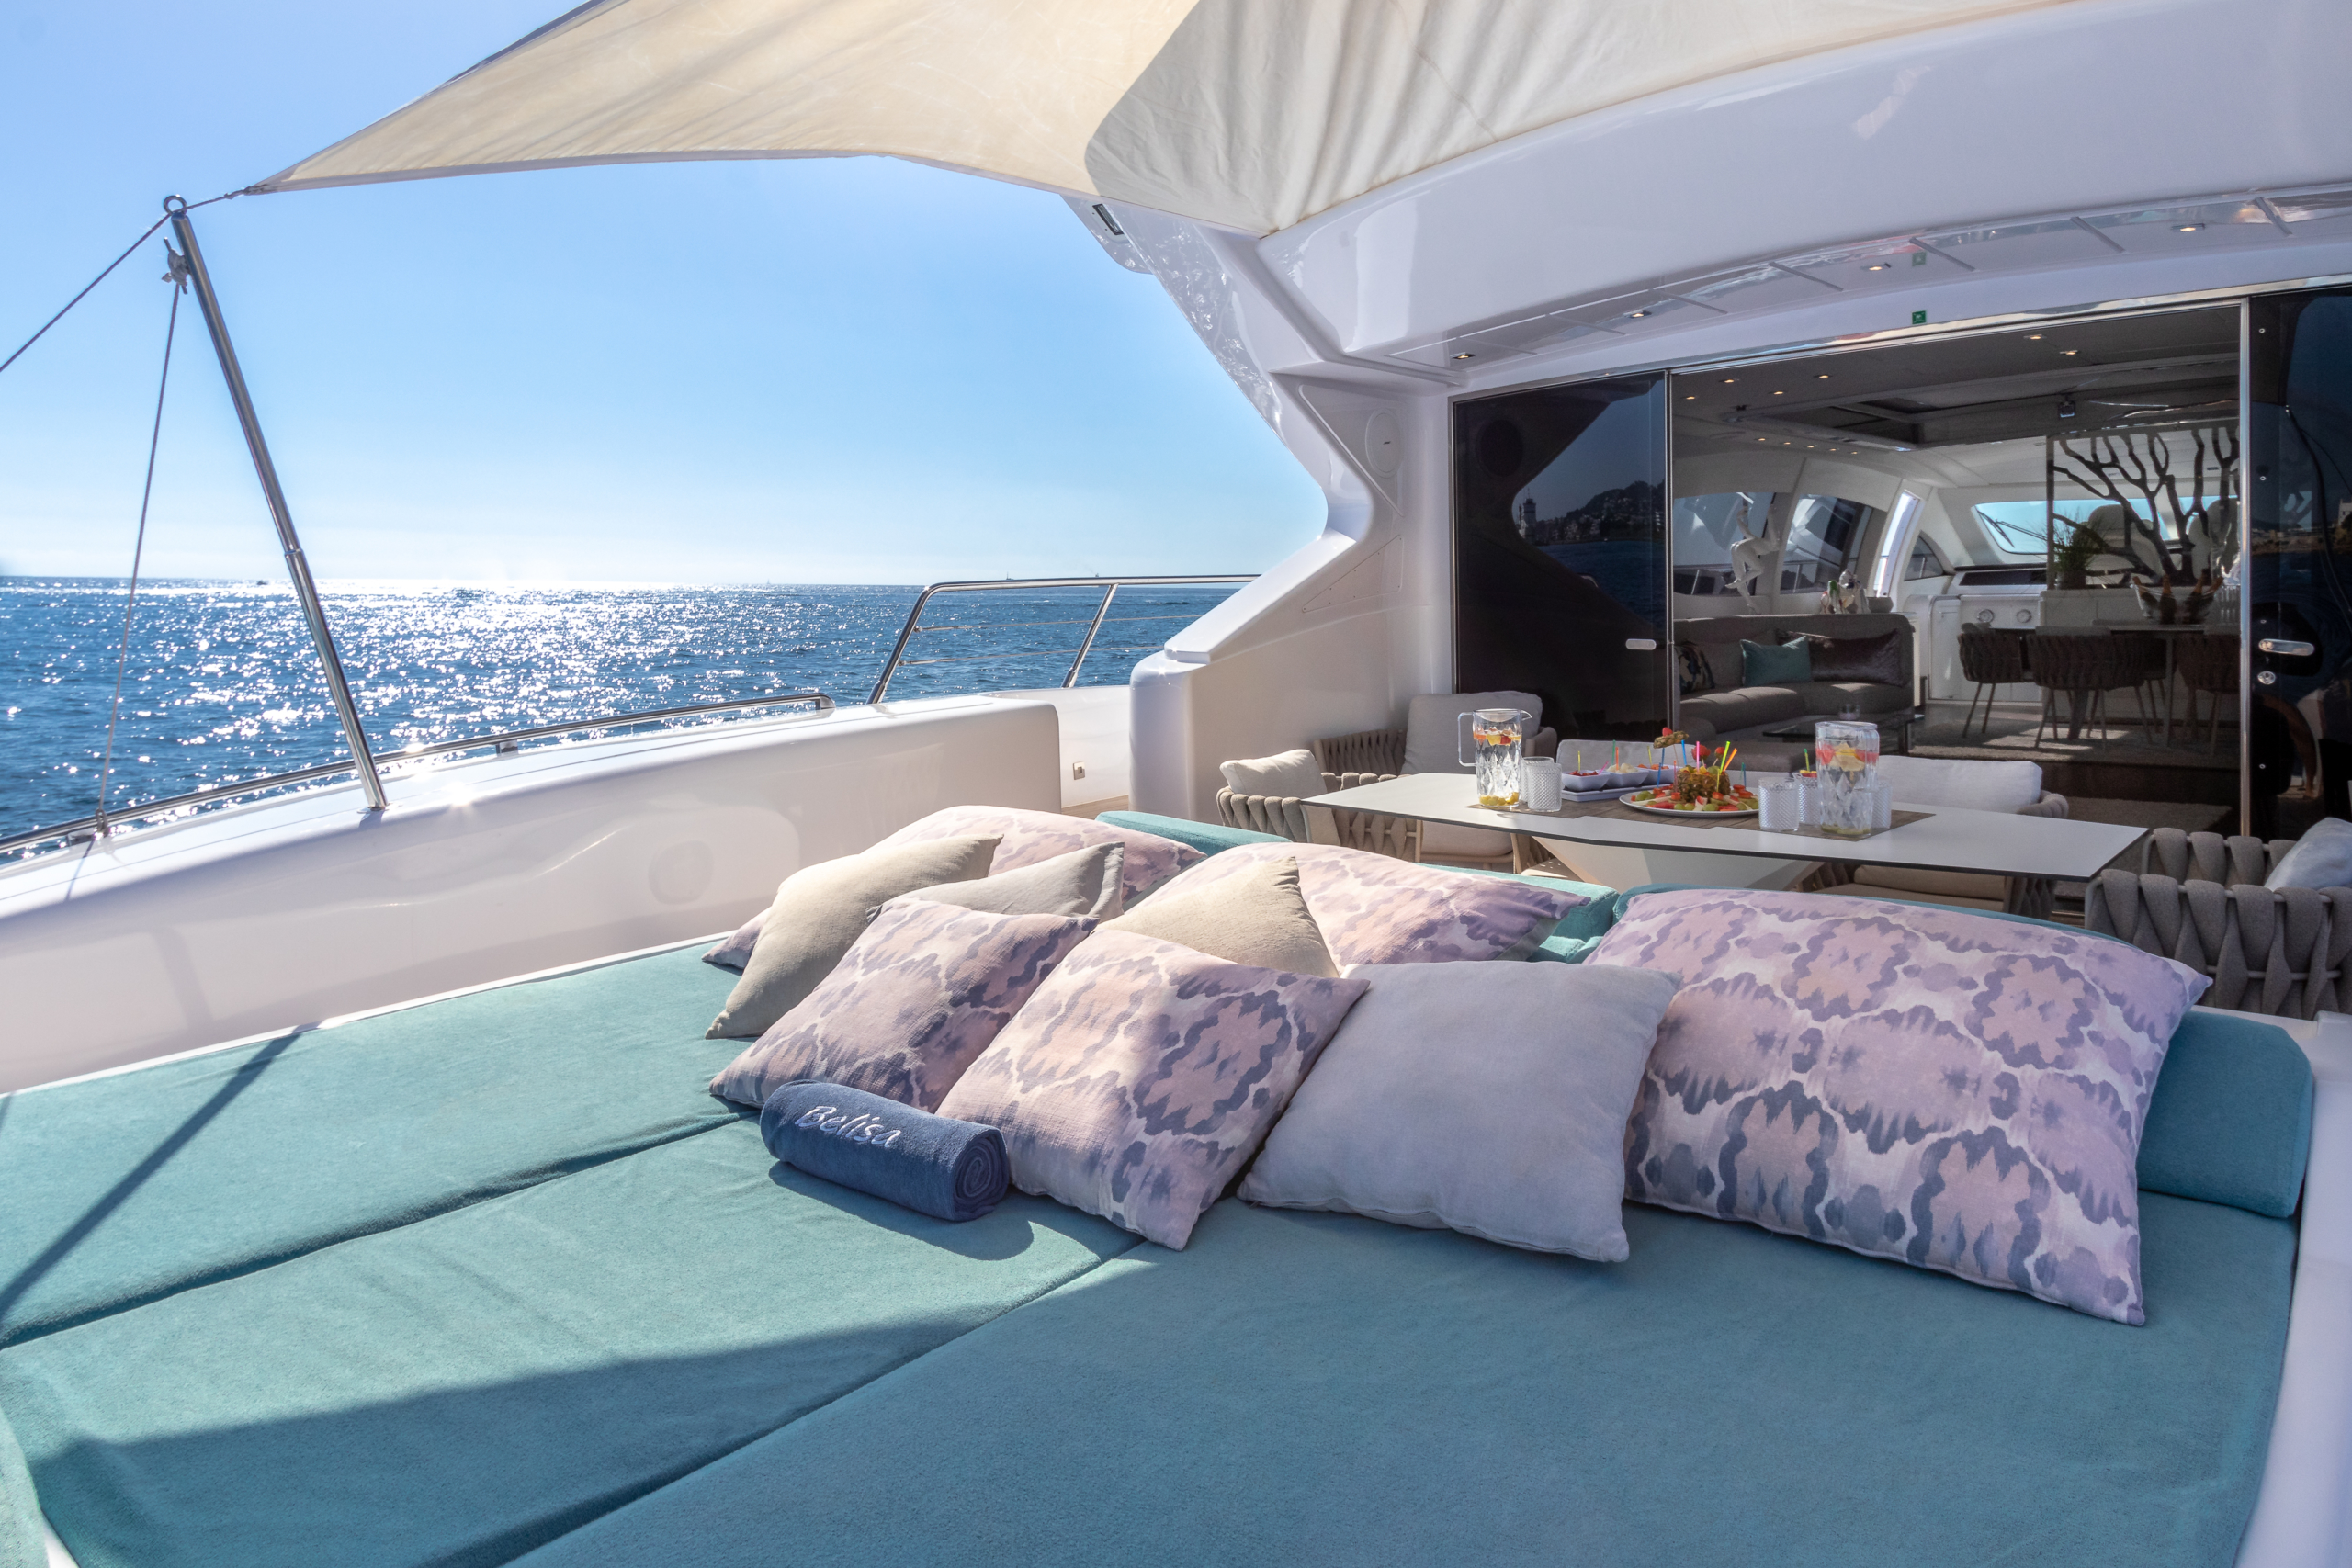 BELISA-Magusta-Yacht For Charter-Ibiza-Foredeck